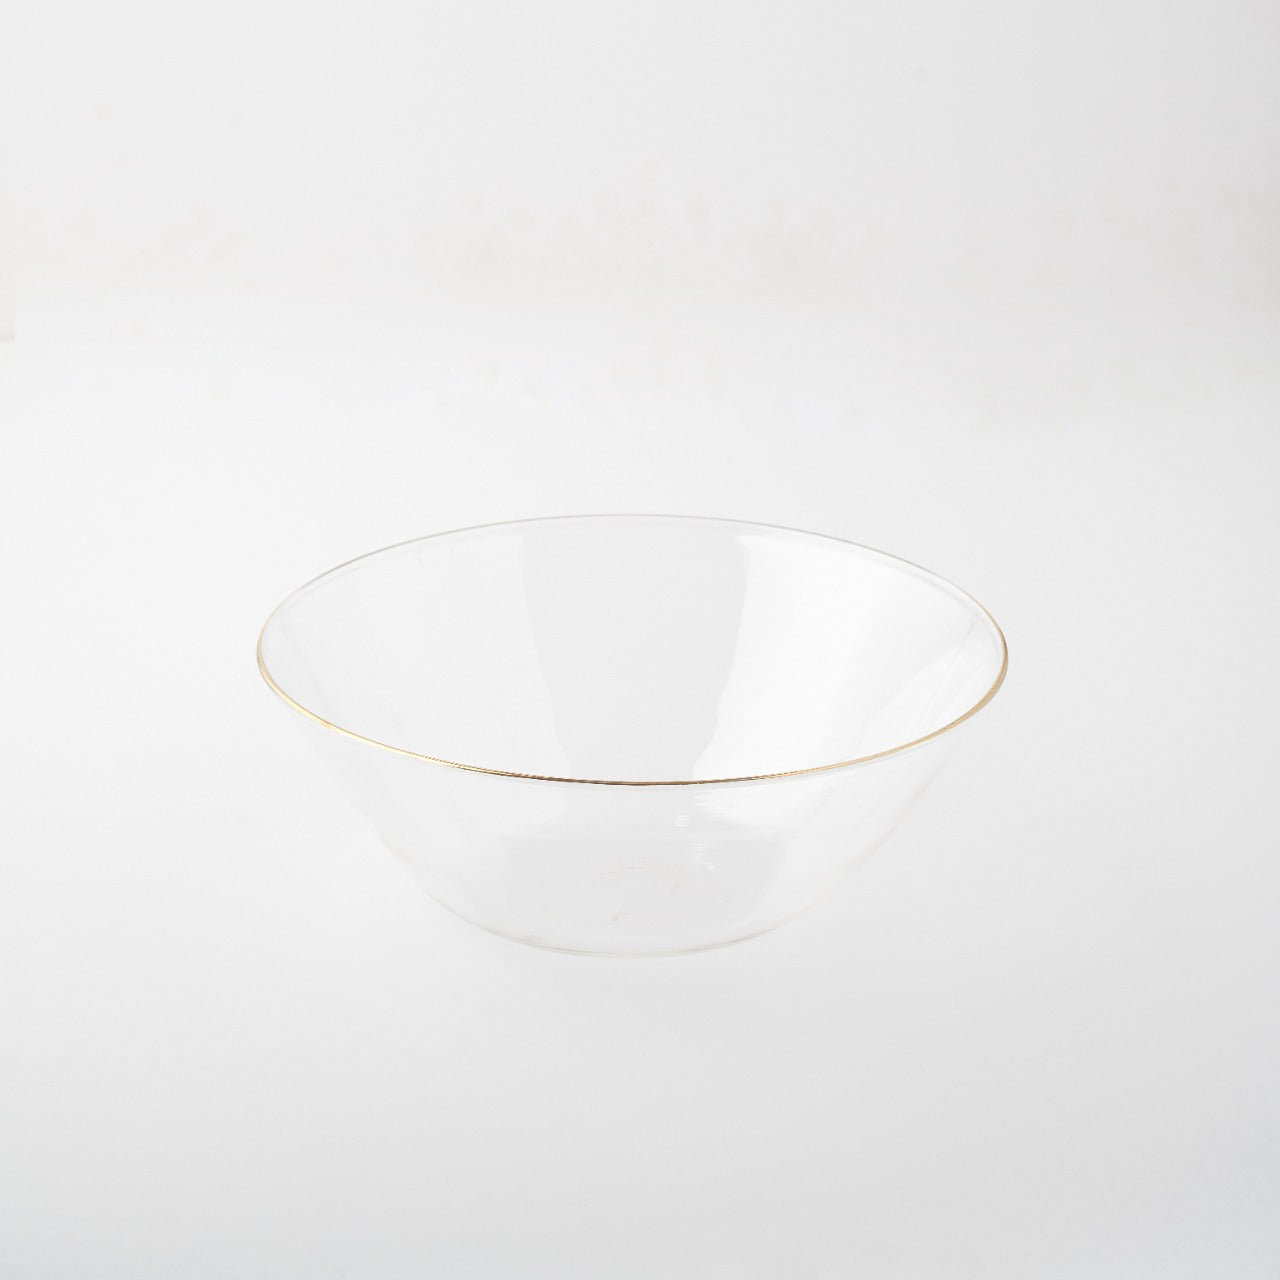 Rekama-Hand Blown Glass Bowls with Gold Edge